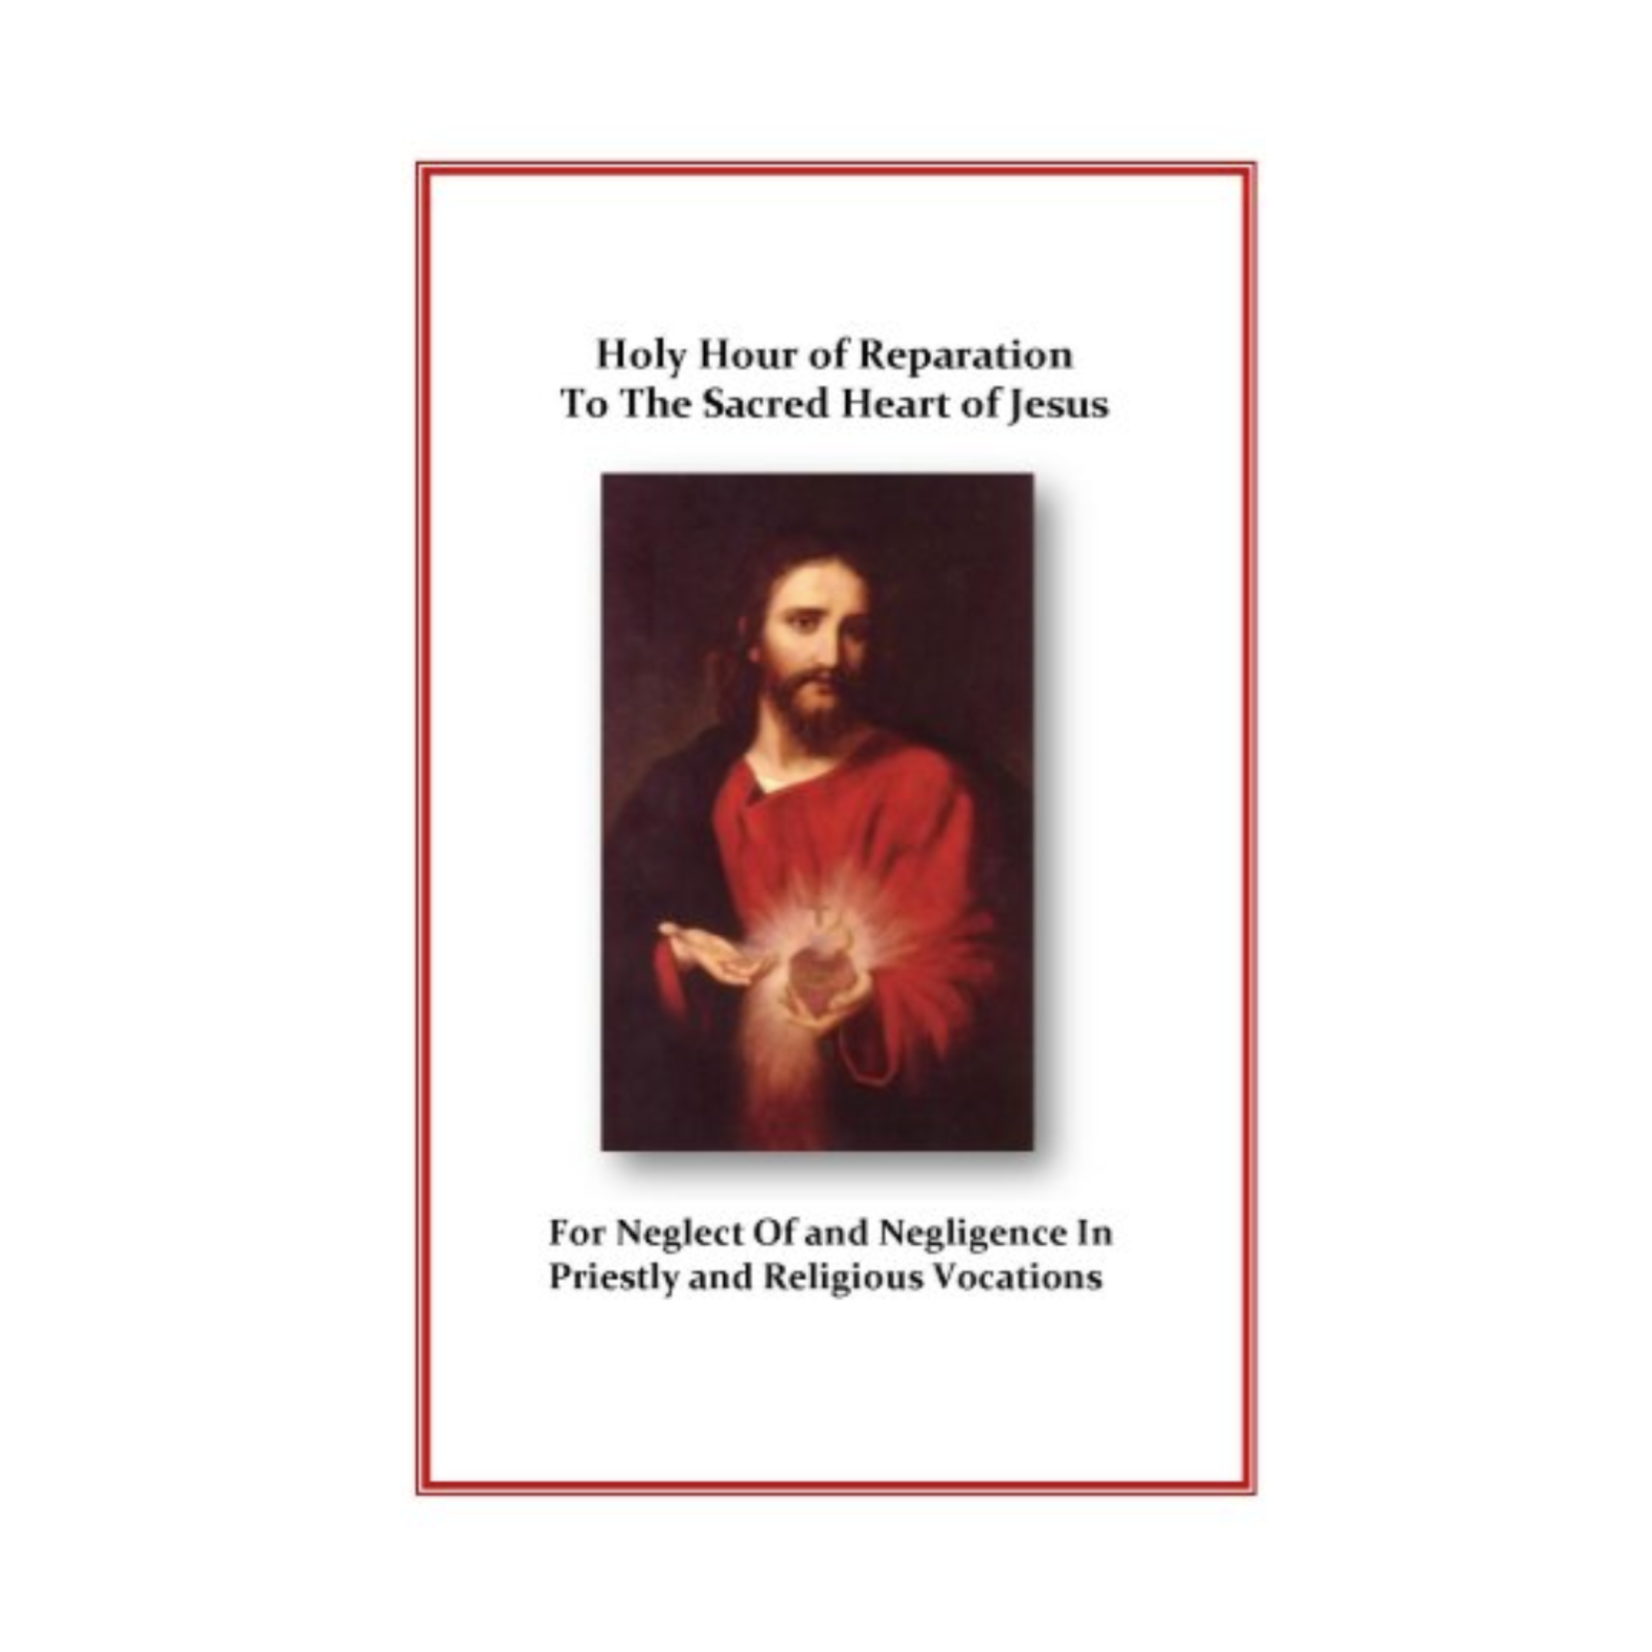 Holy Hour of Reparation to the Sacred Heart of Jesus